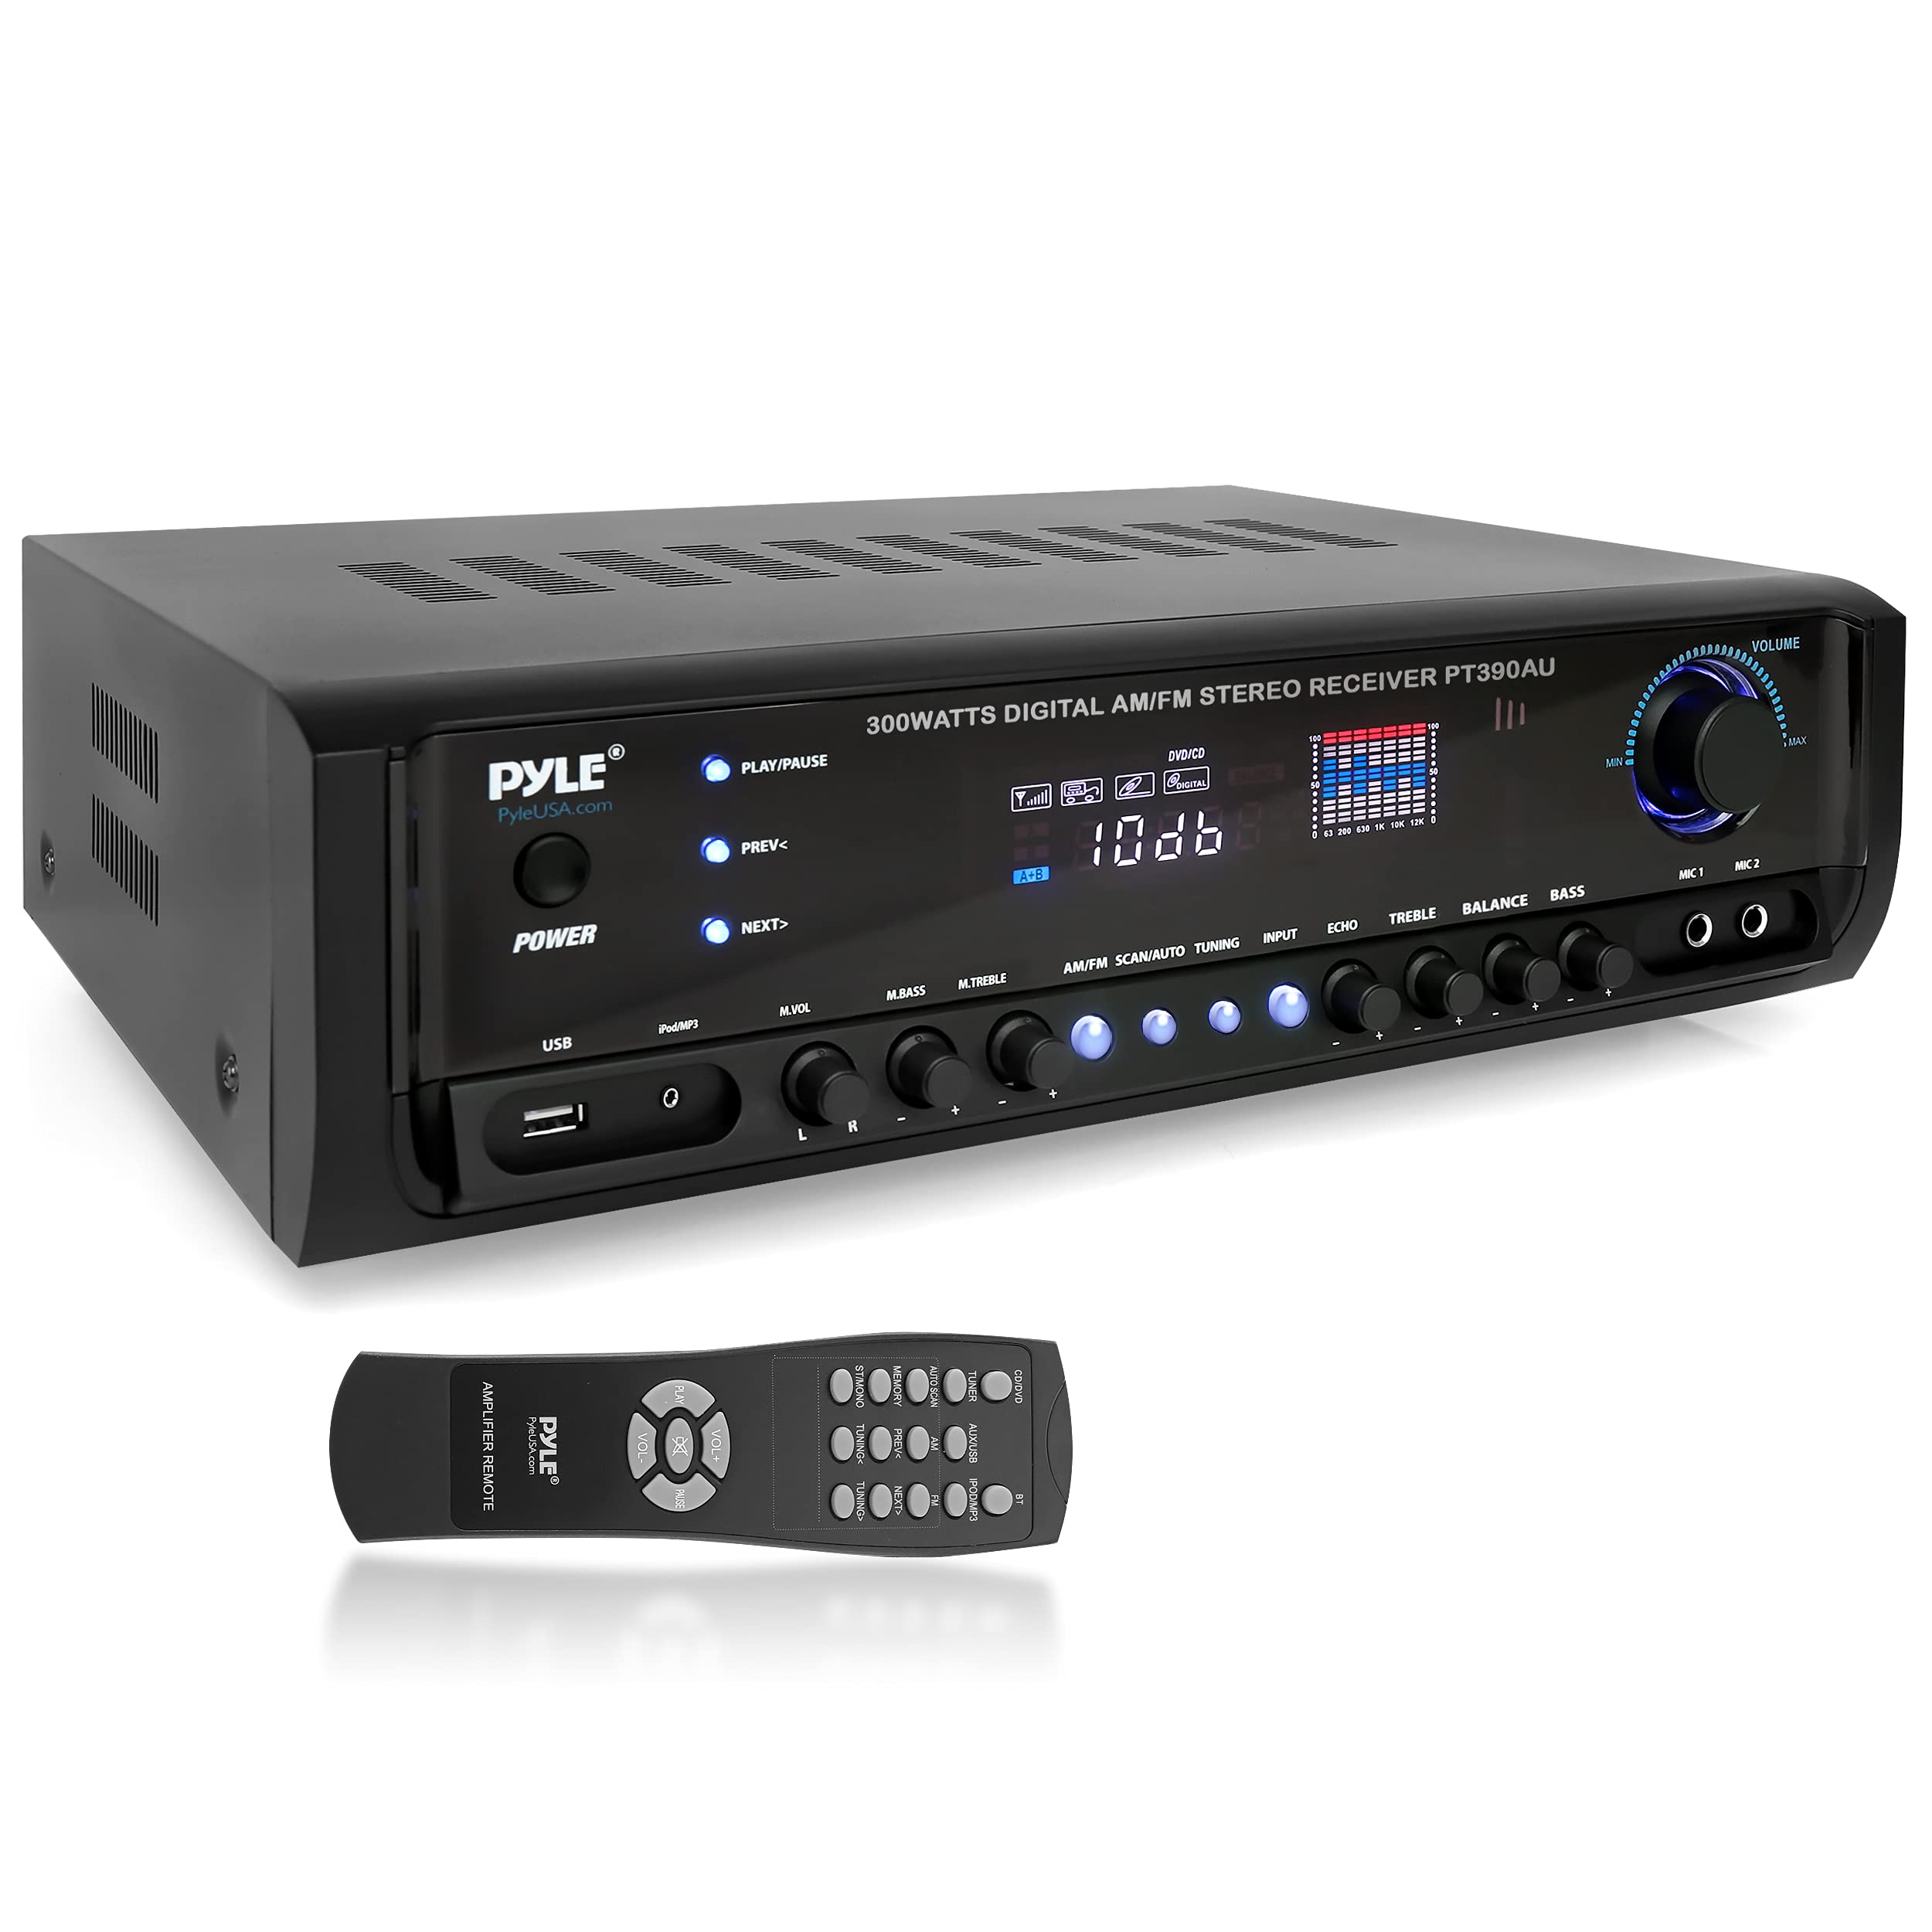 Pyle Home Audio Power Amplifier System - 300W 4 Channel Theater Power Stereo Sound Receiver Box Entertainment w/USB, RCA, AUX, Mic w/Echo, LED, Remote - for Speaker, iPhone, PA, Studio -  PT390AU.5